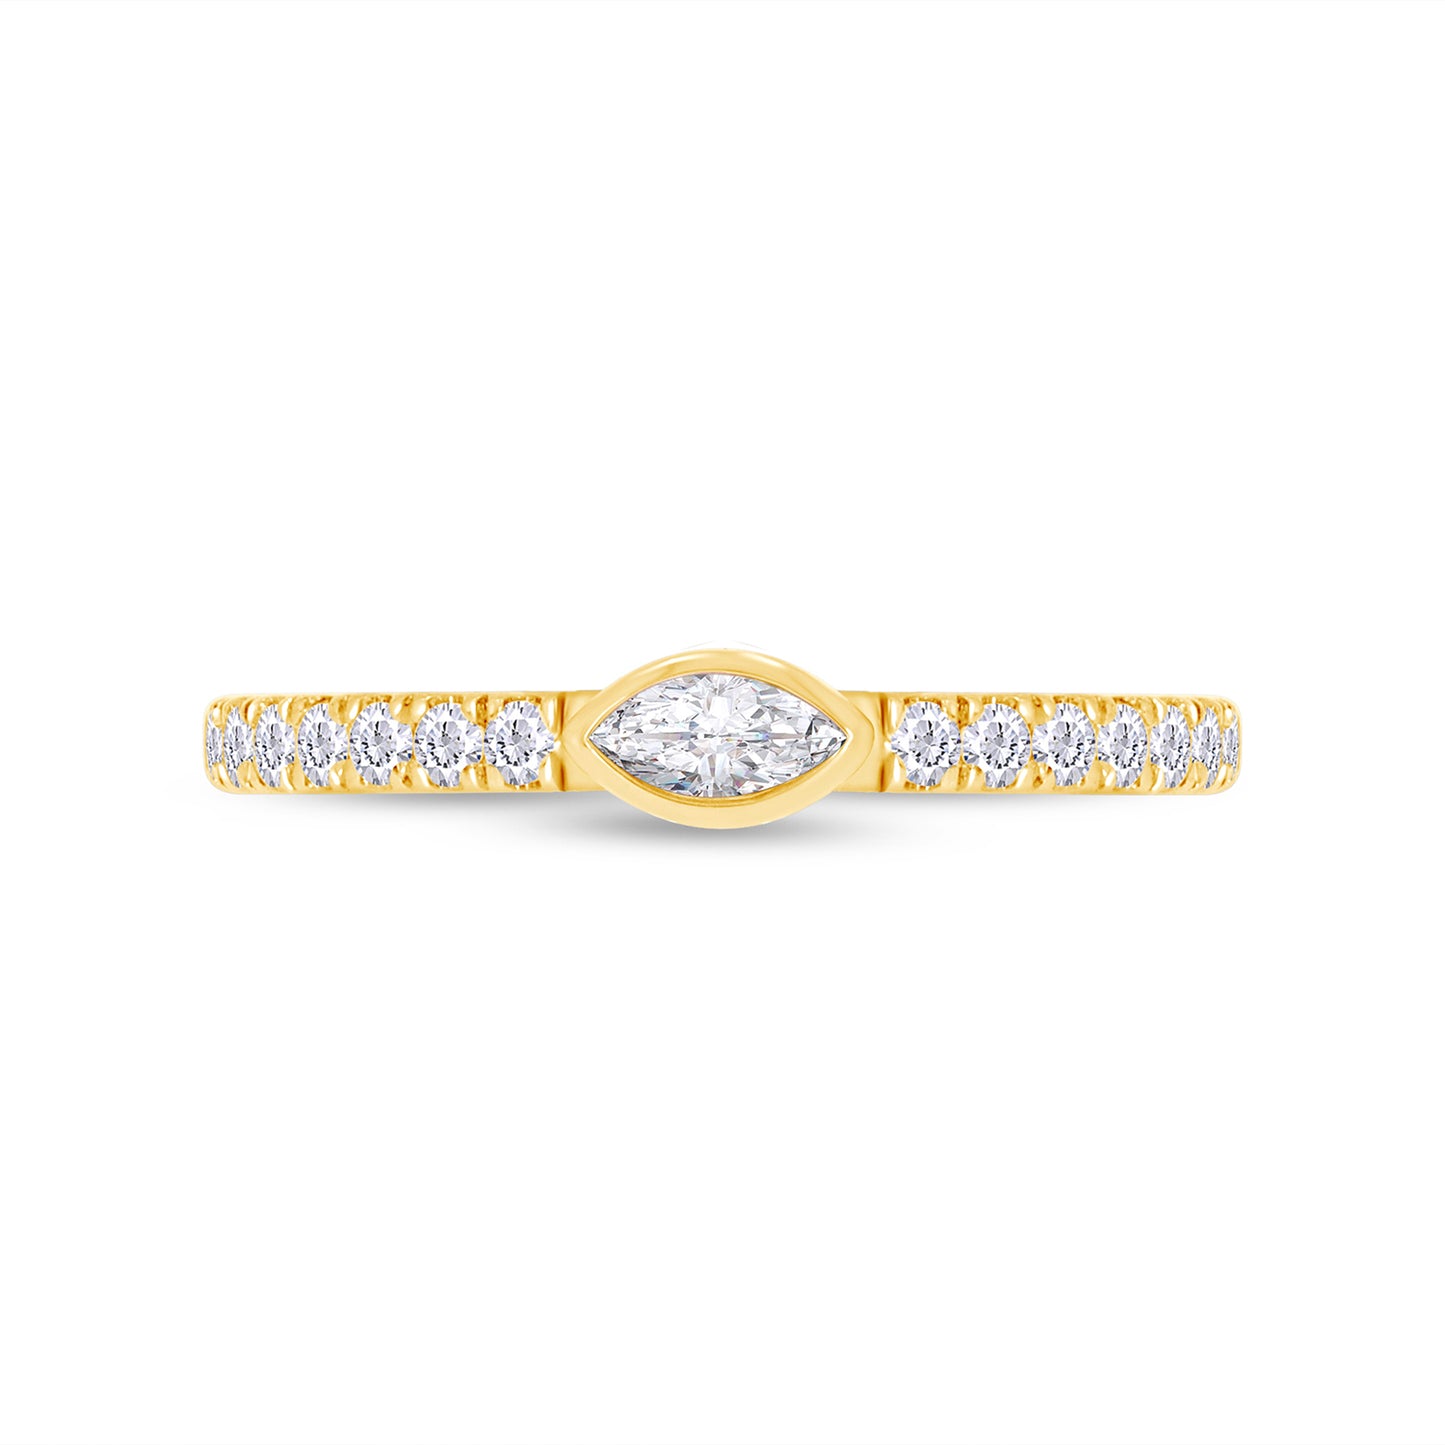 Marquise & Round Cut Lab Created Moissanite Diamond Bezel Set Wedding Band In 925 Sterling Silver (0.50 Cttw)